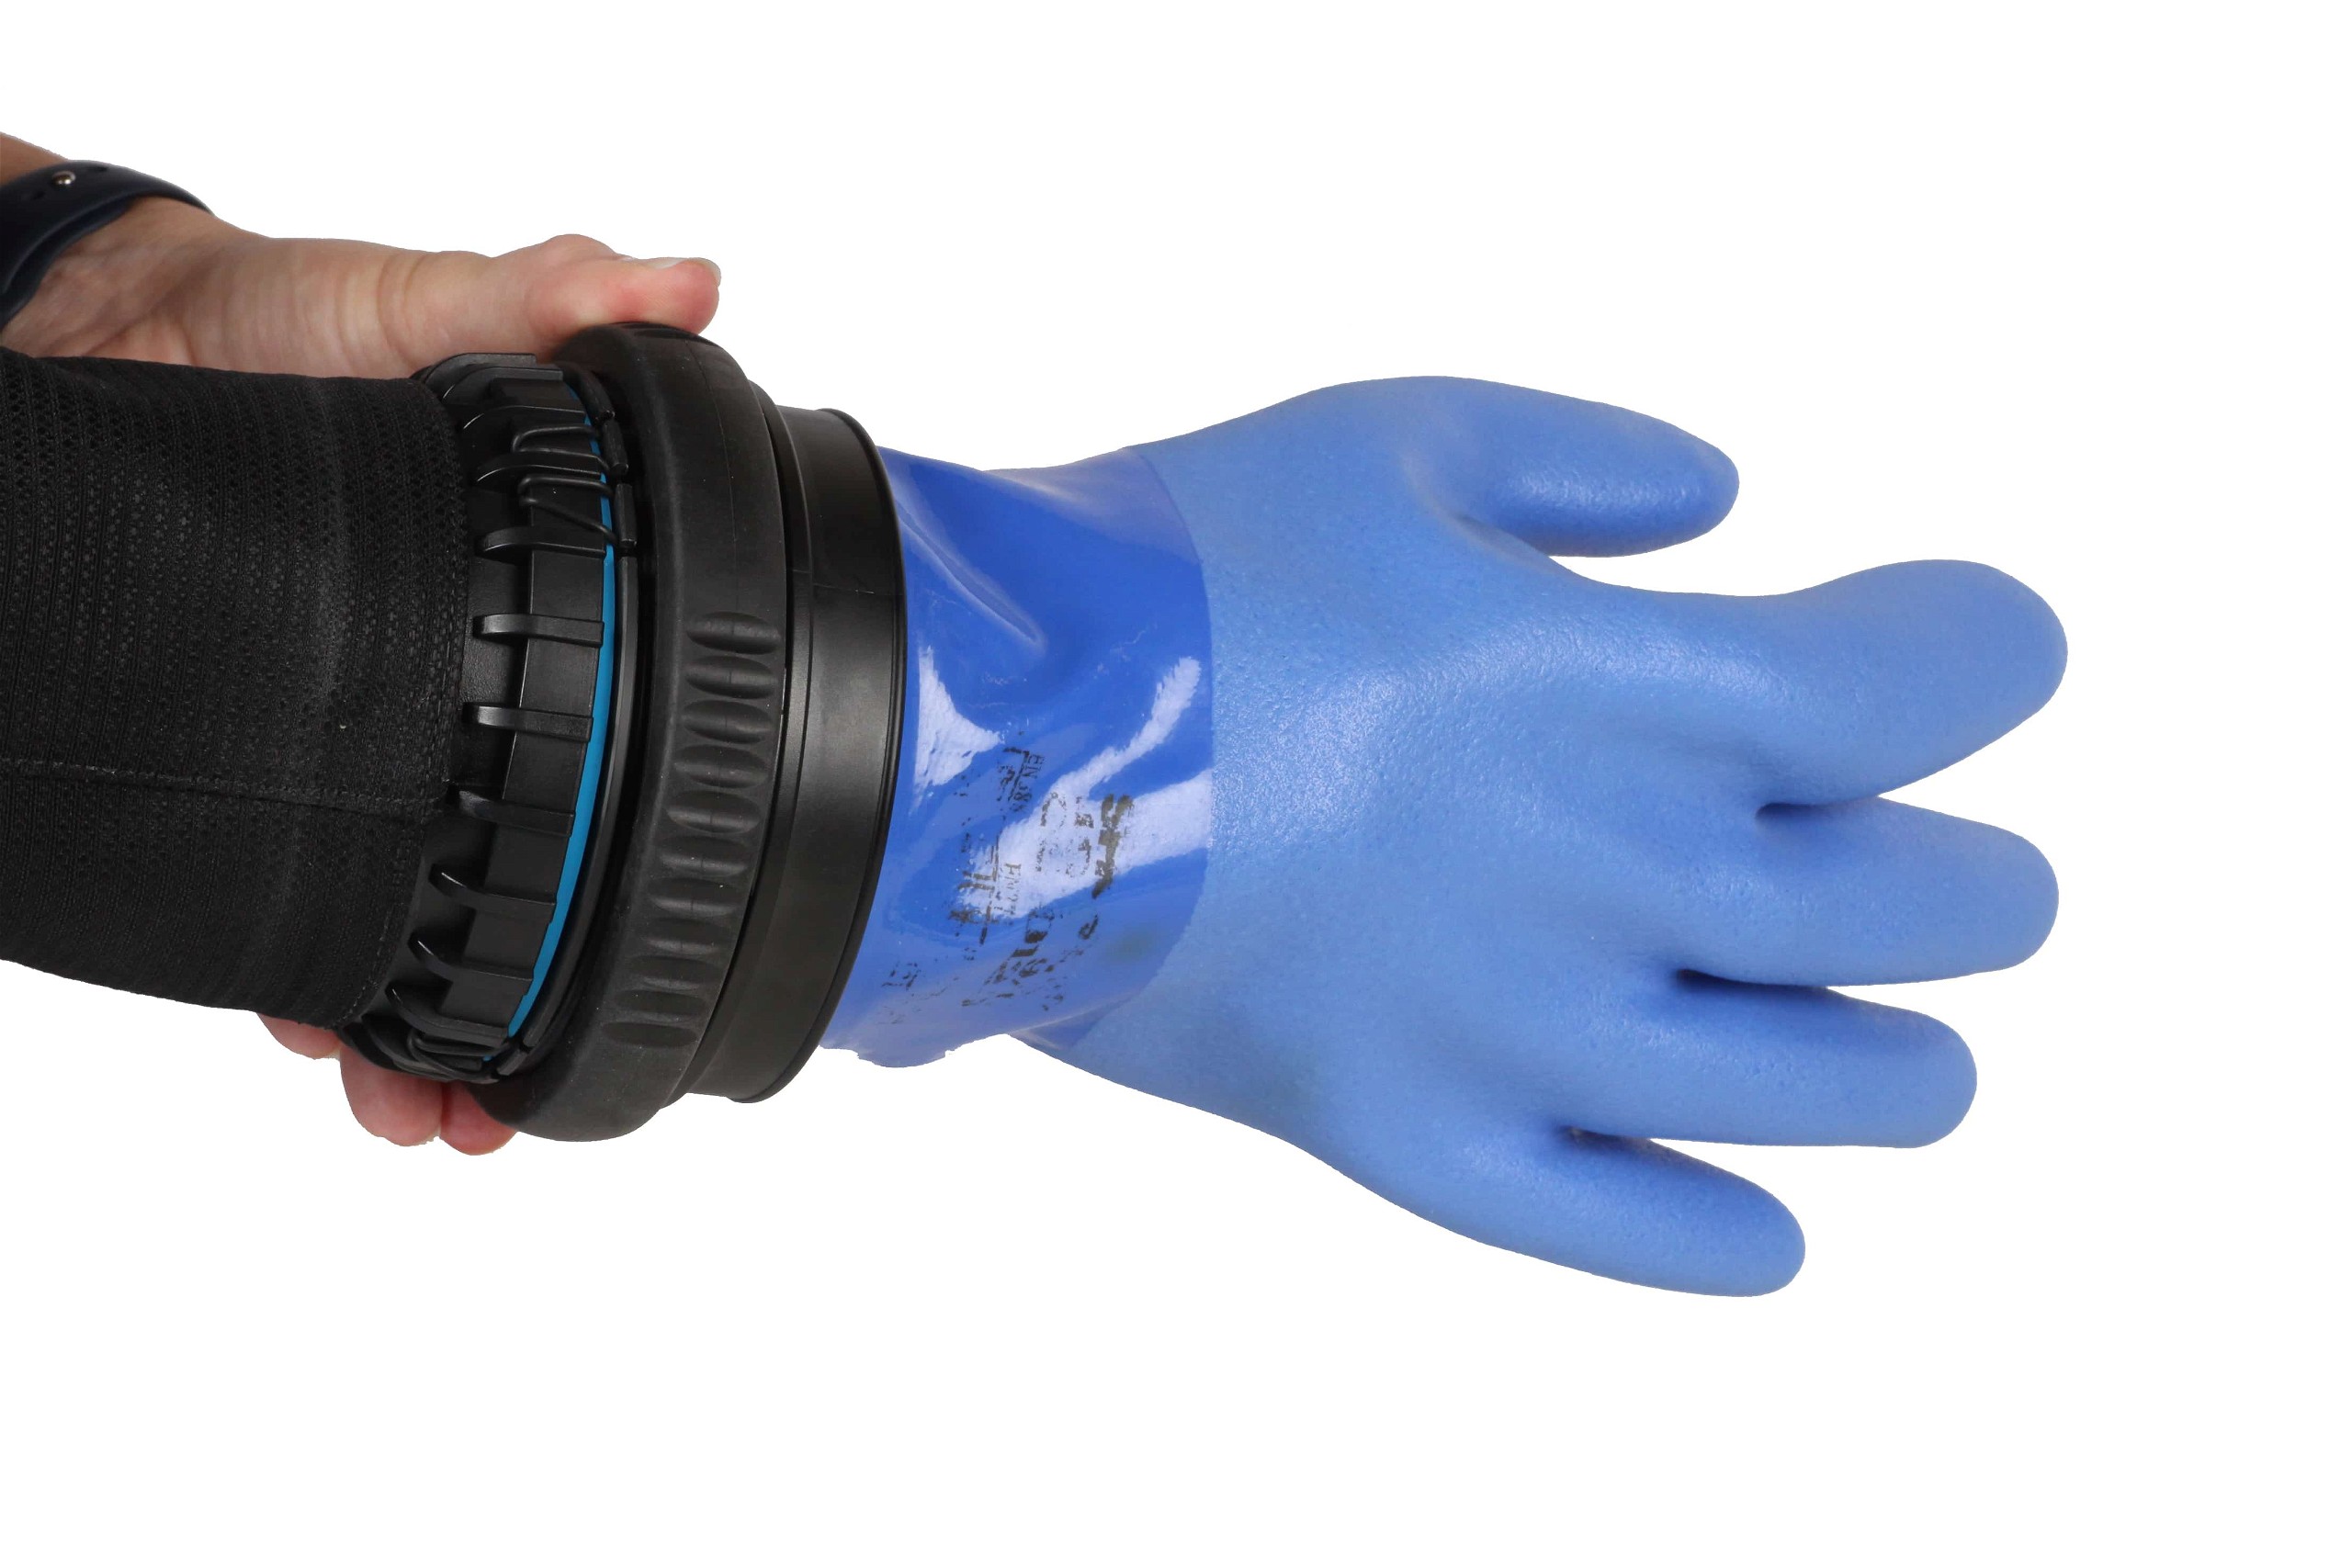 SI TECH's Oberon Dry Glove System